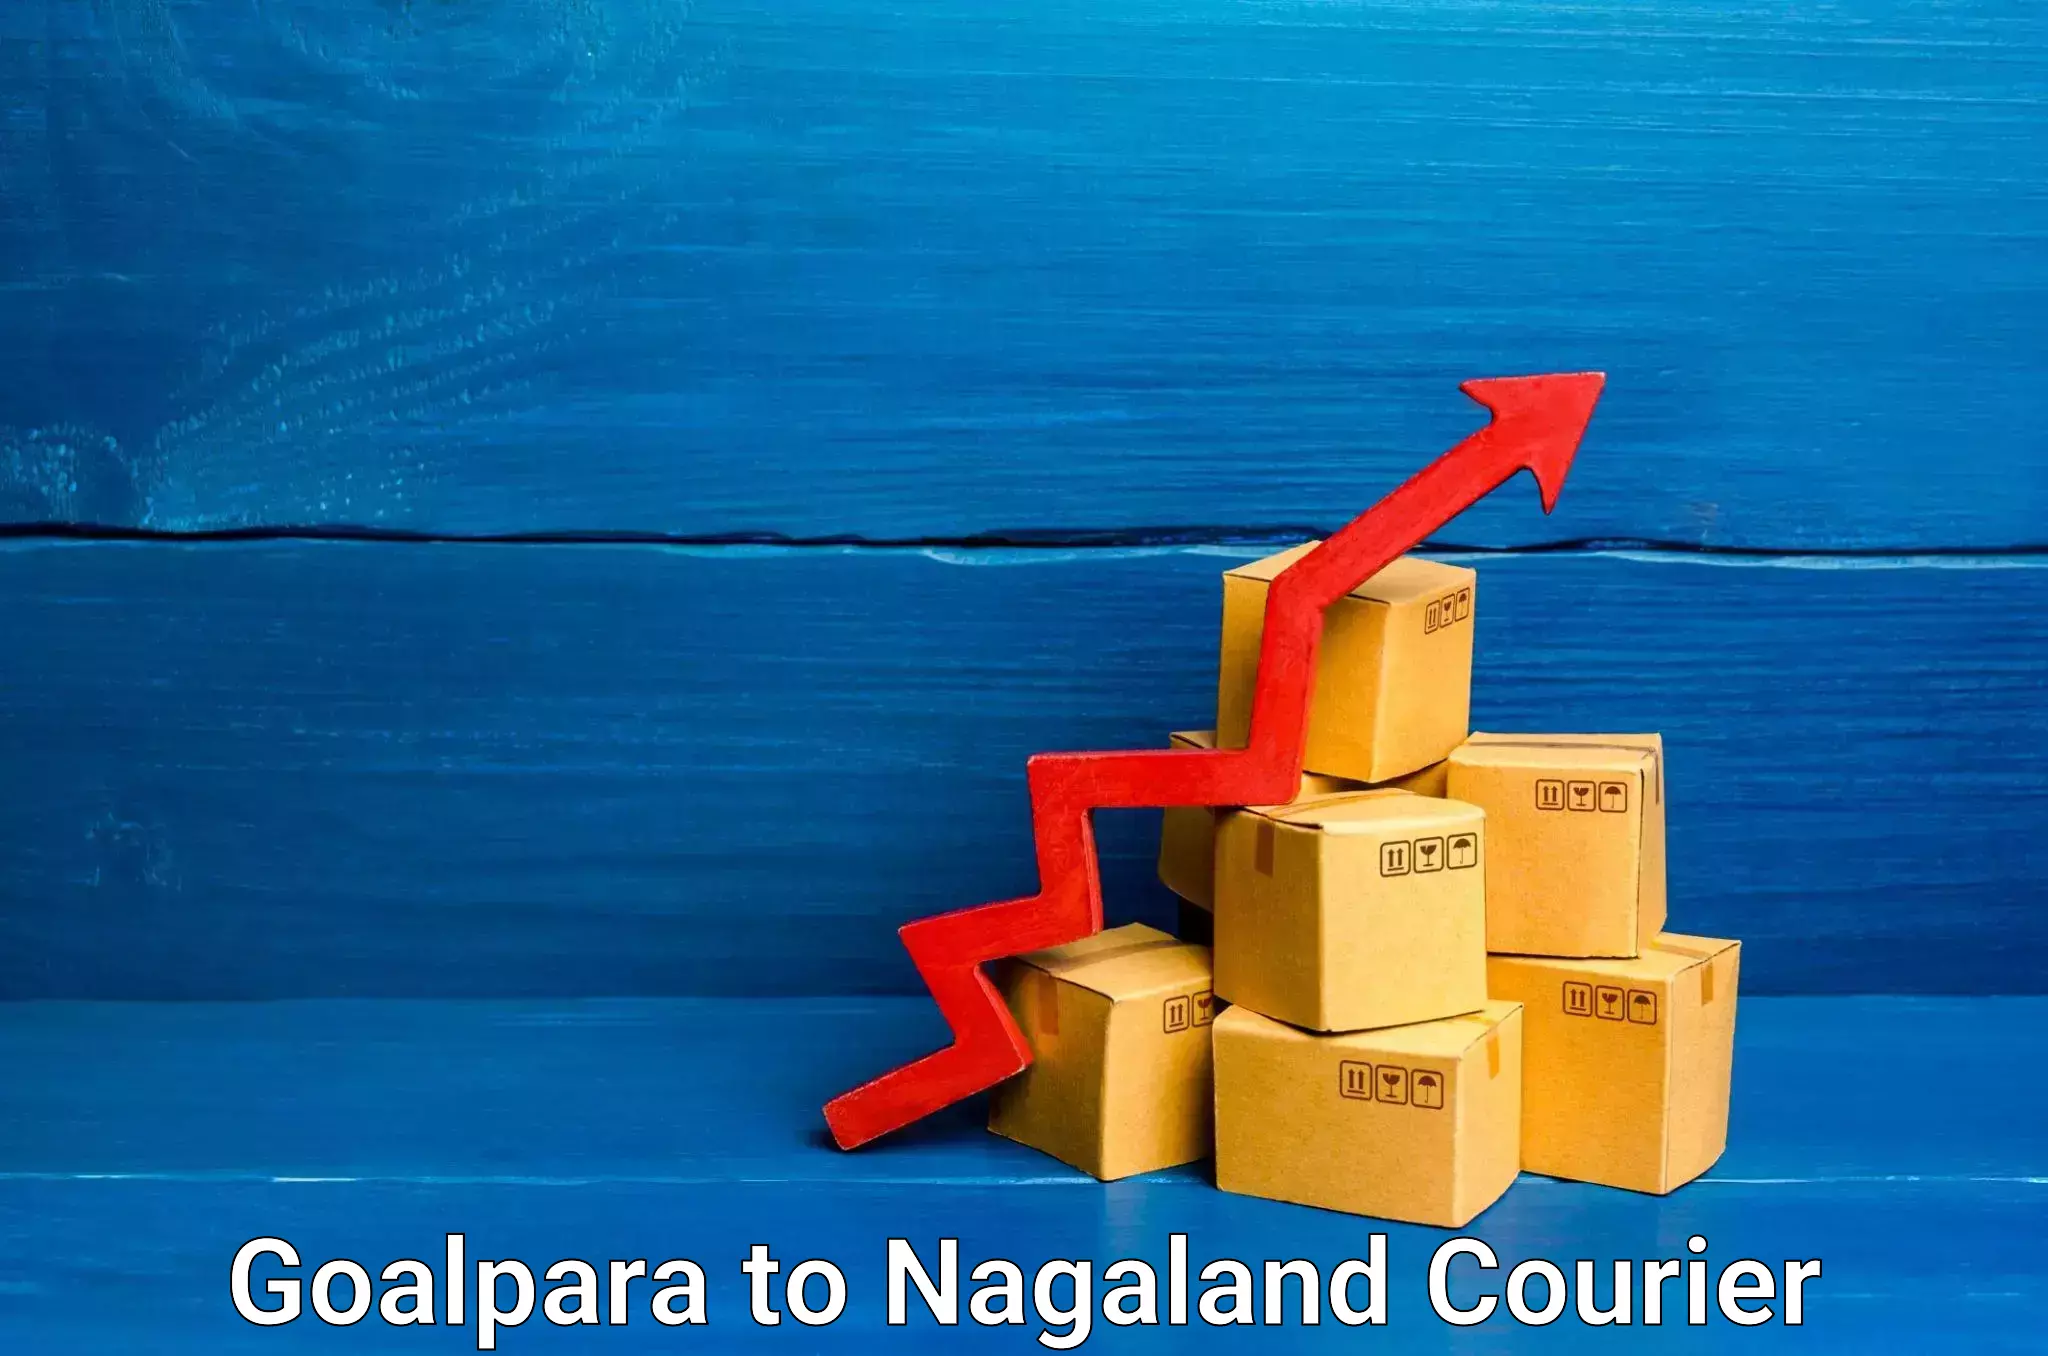 Reliable delivery network Goalpara to Nagaland